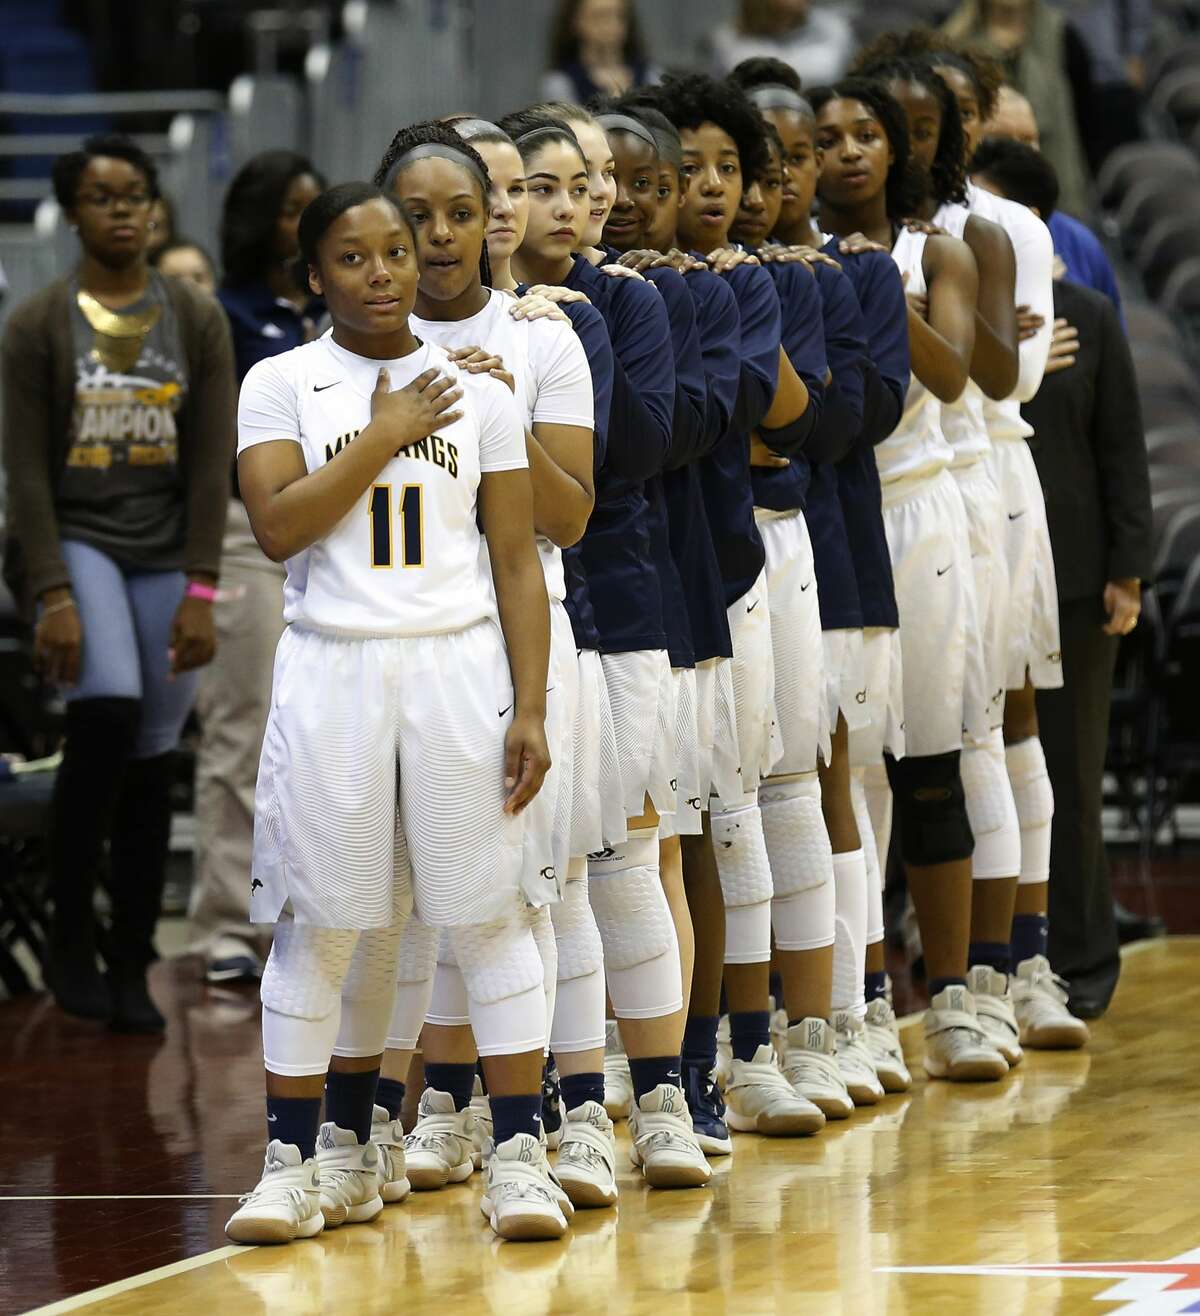 The Houston Cypress Ranch girls basketball team stand for the national anthem before their game against Pflugerville in the UIL Girls Class 6A State Semifinal basketball game at the Alamodome in San Antonio on Friday, Mar. 3, 2017. (Kin Man Hui/San Antonio Express-News)